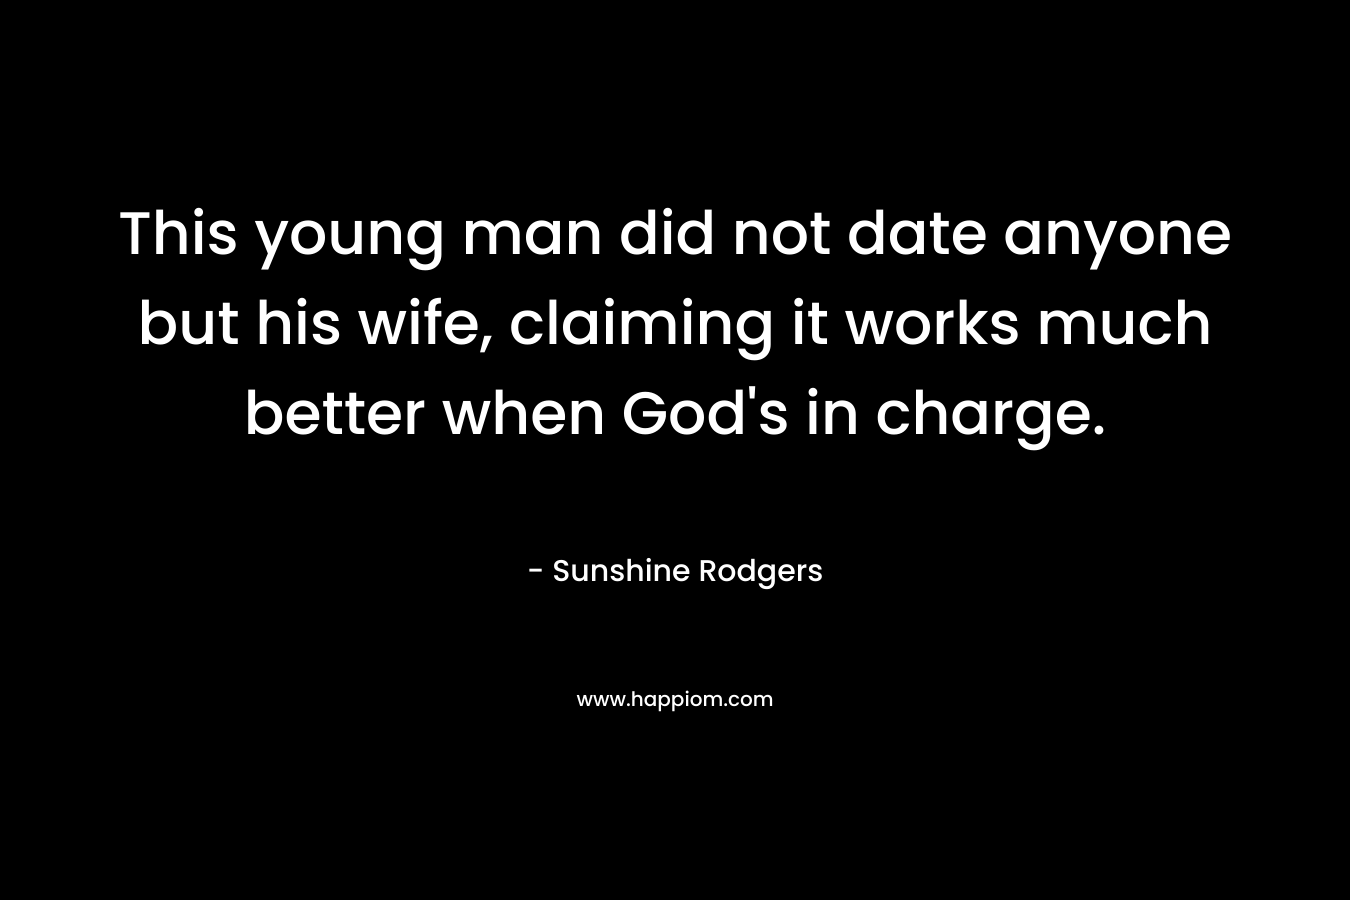 This young man did not date anyone but his wife, claiming it works much better when God’s in charge. – Sunshine Rodgers